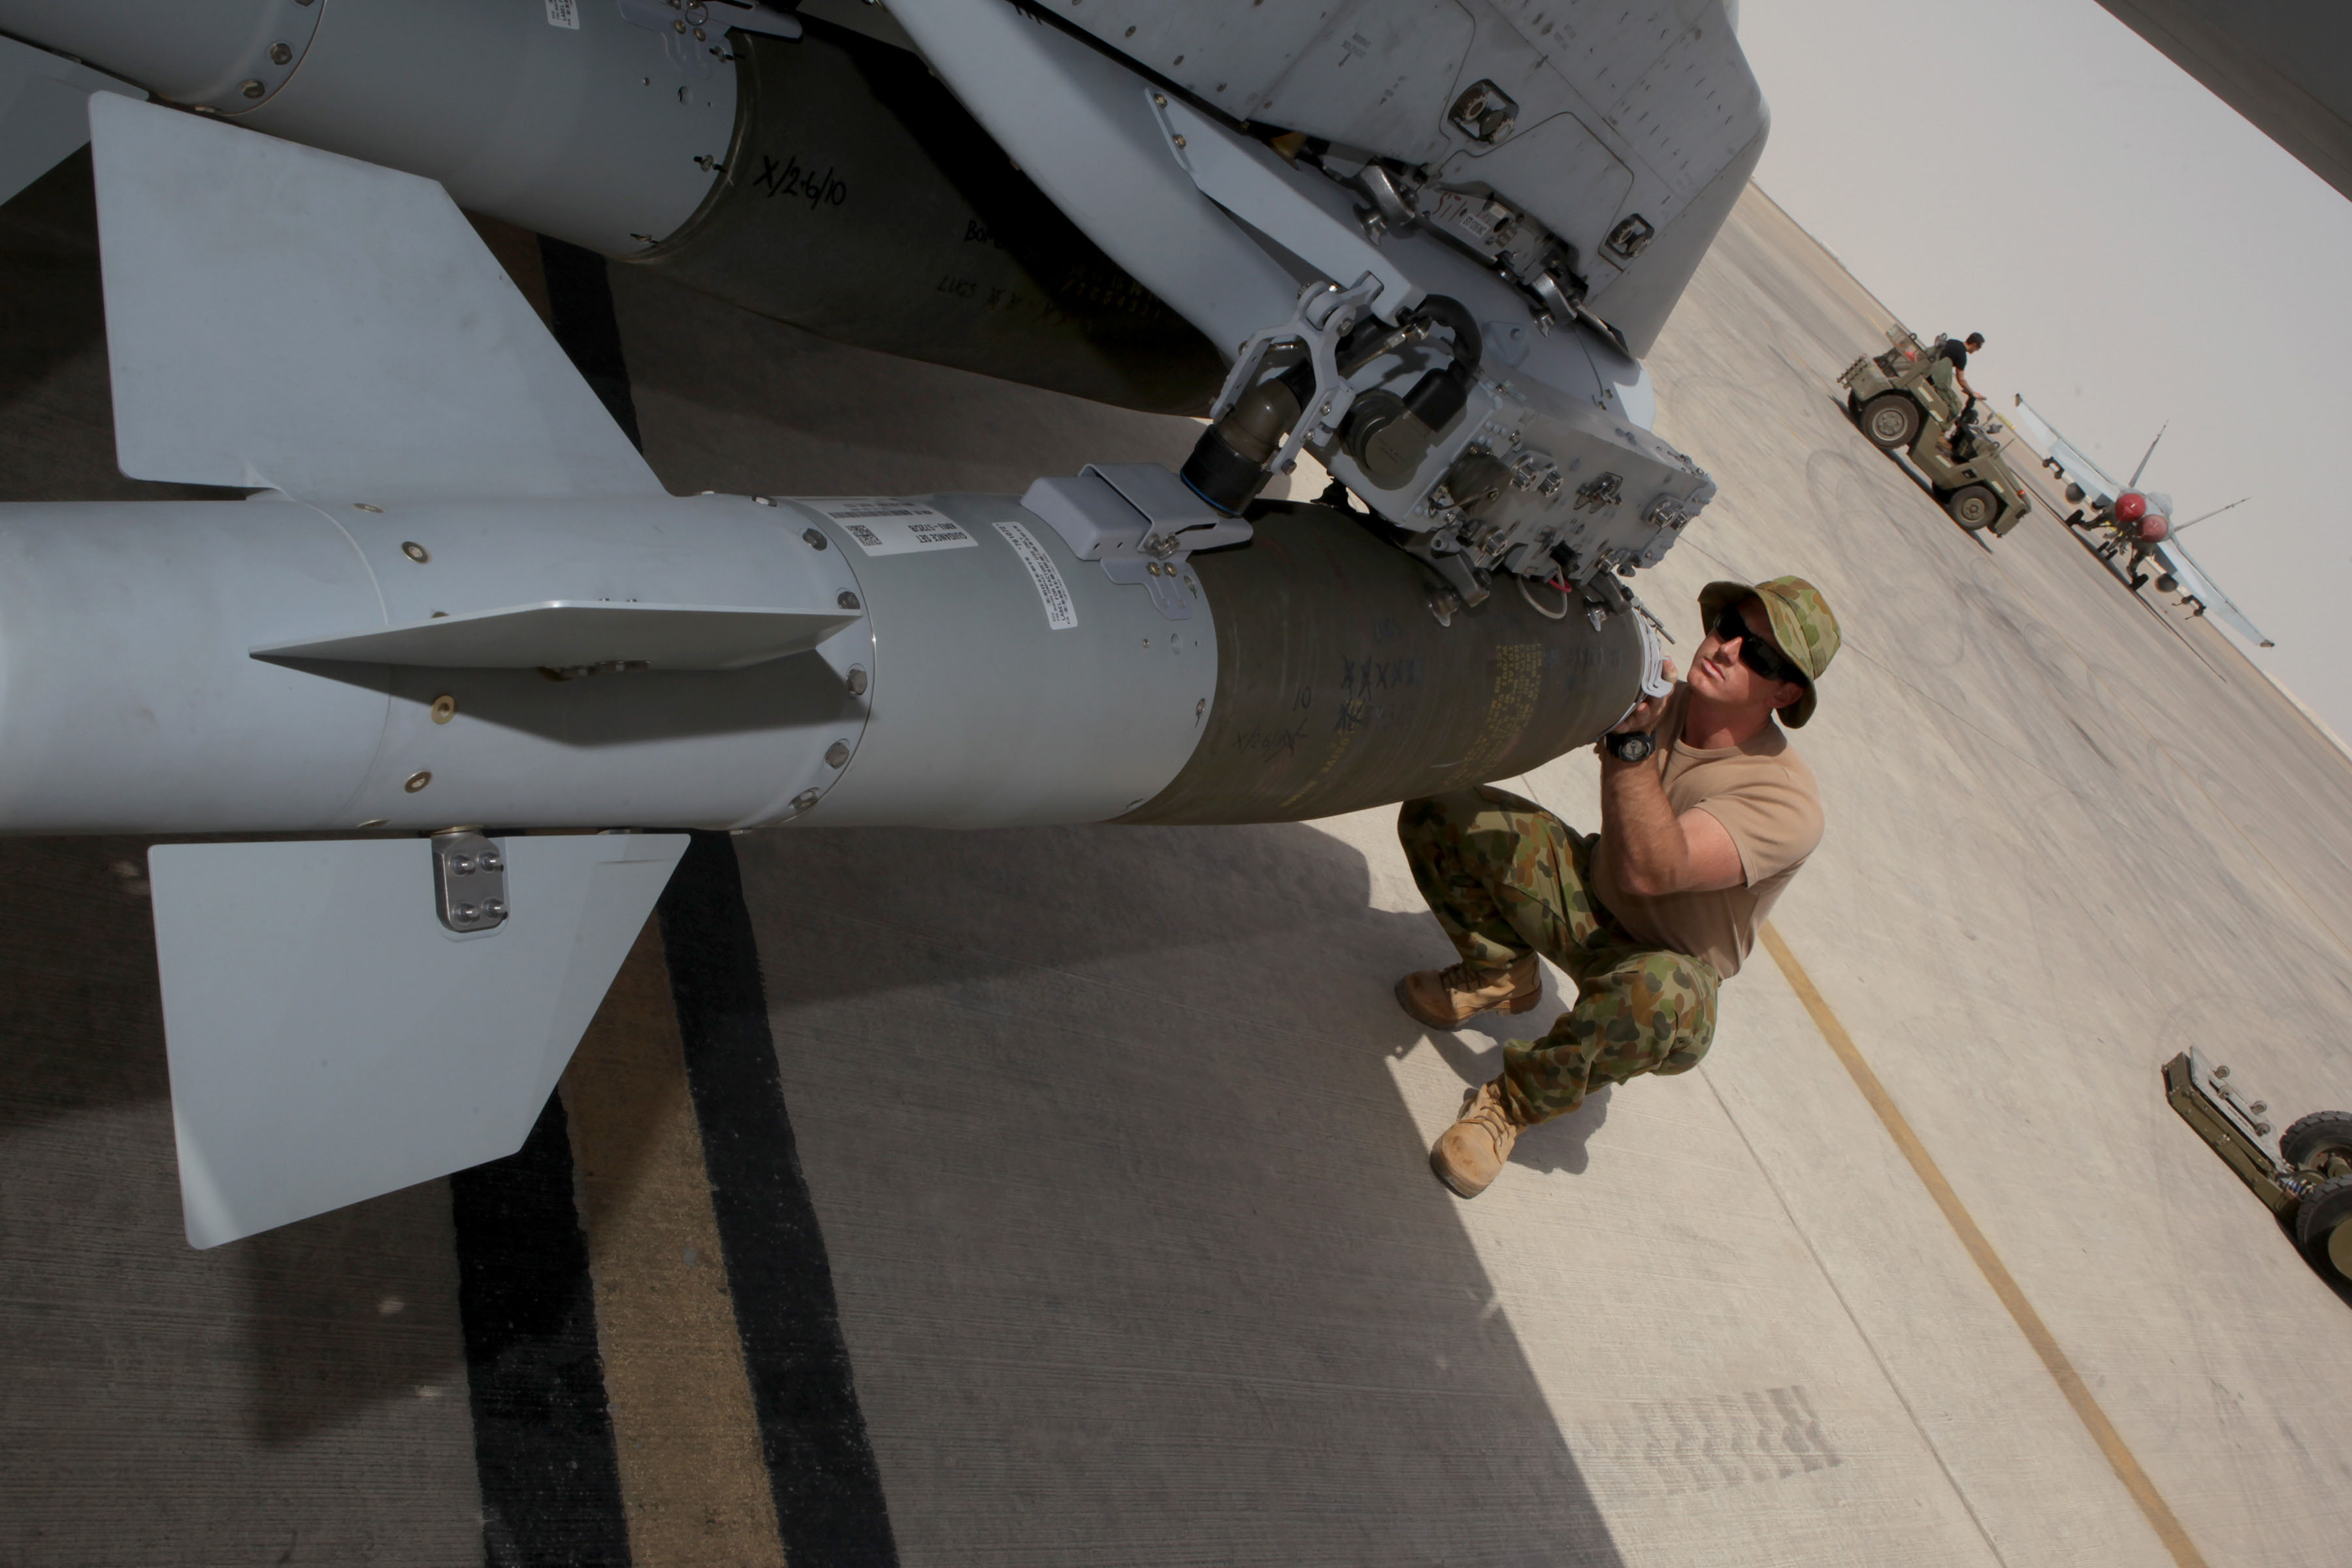 Ayustralian Armament Technician performs final checks after loading a GBU-38 weapon on an F/A-18A Hornet in the Middle East (Australian MoD)